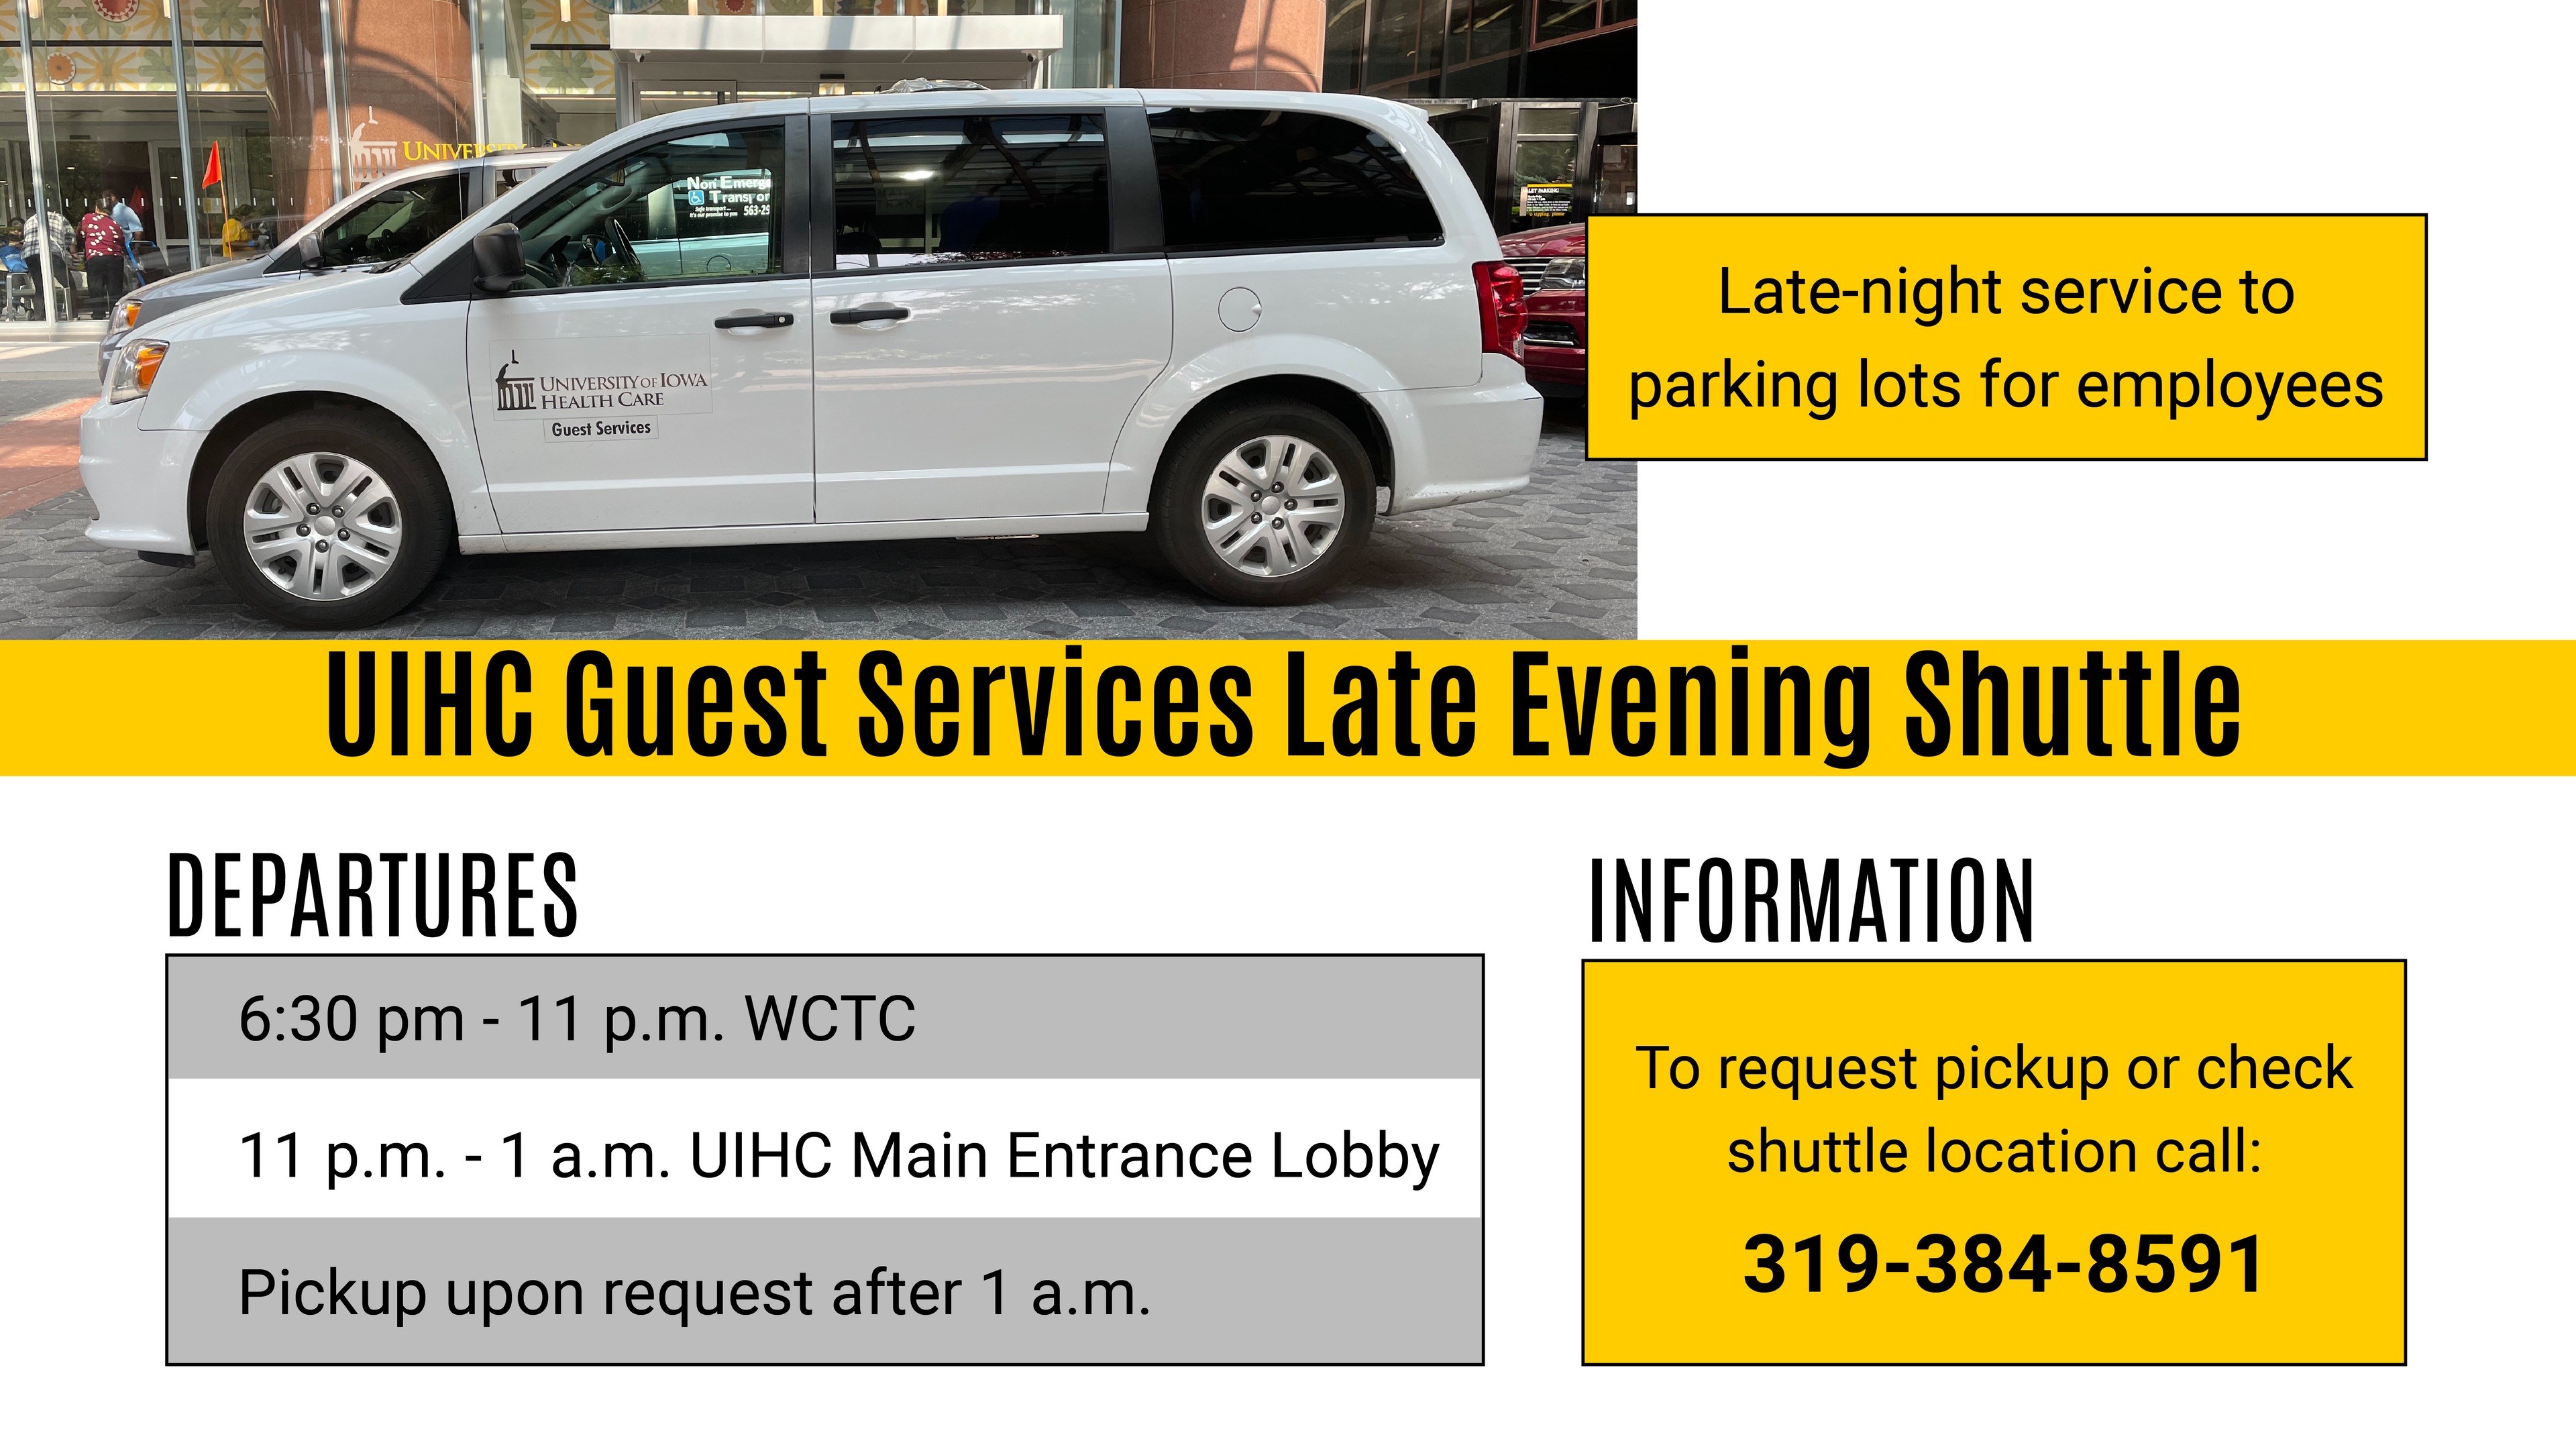 Information on how and when employees can find the guest services parking lot shuttle.